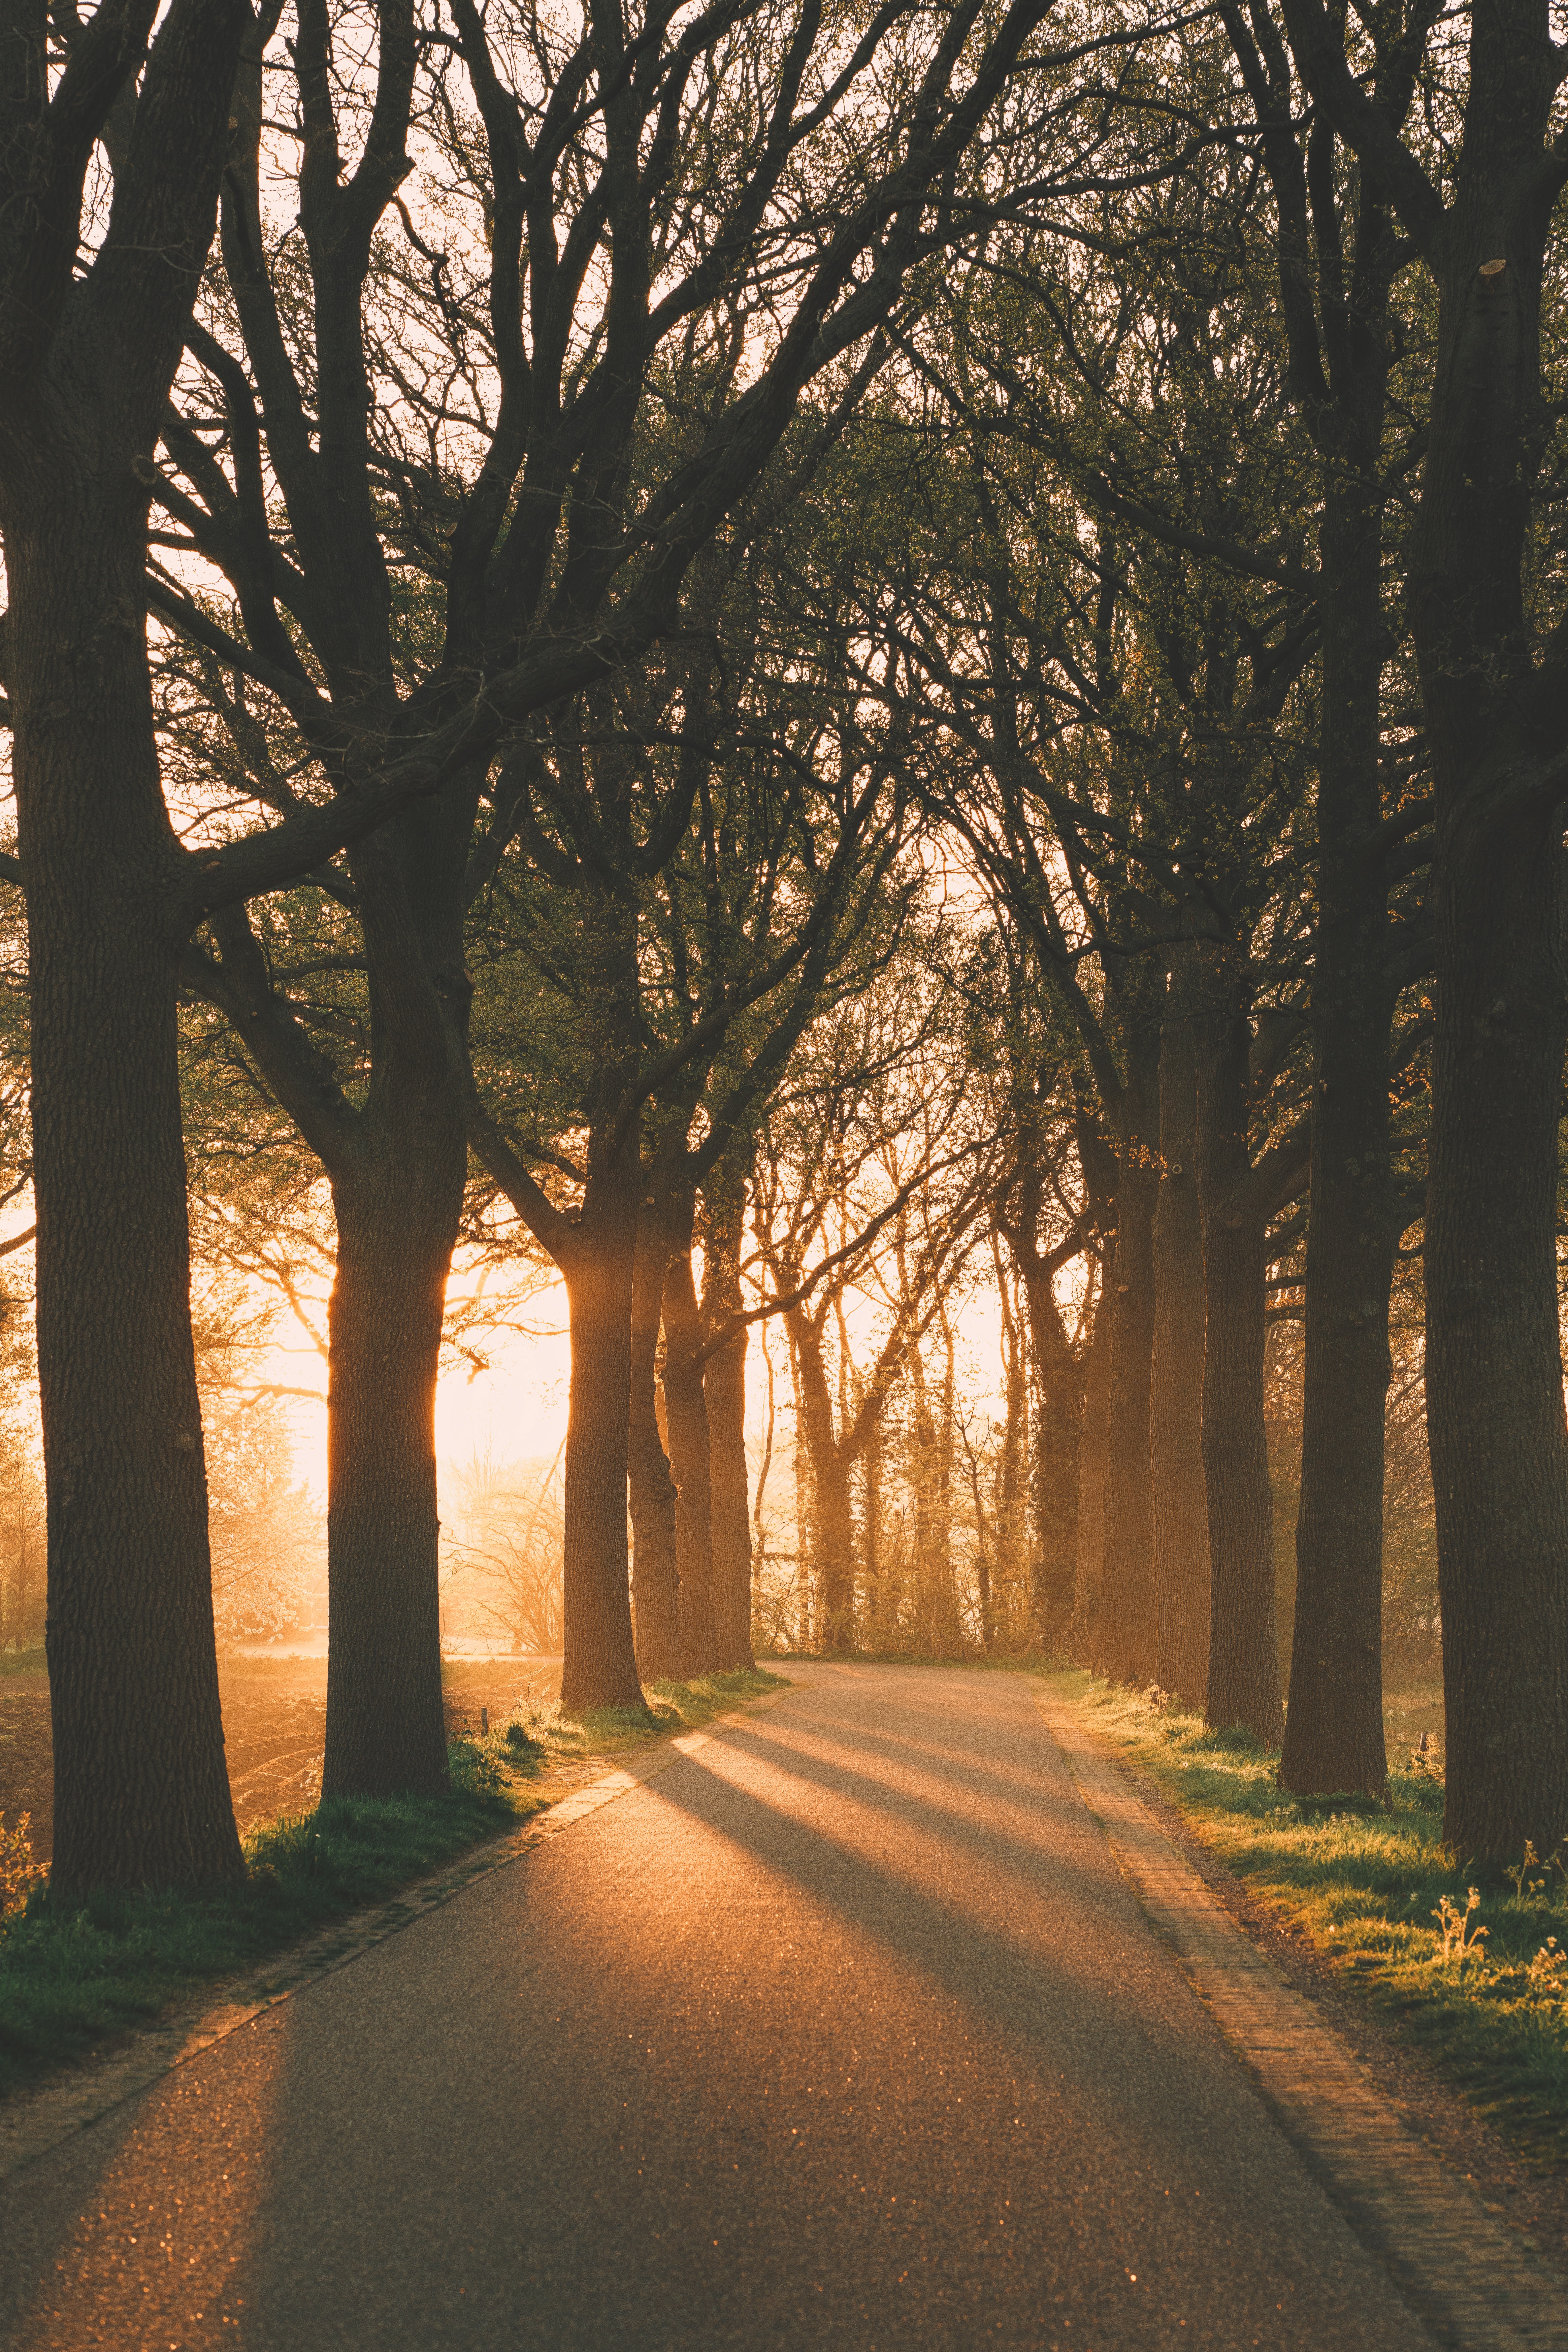 Download background nature, trees, beams, rays, alley